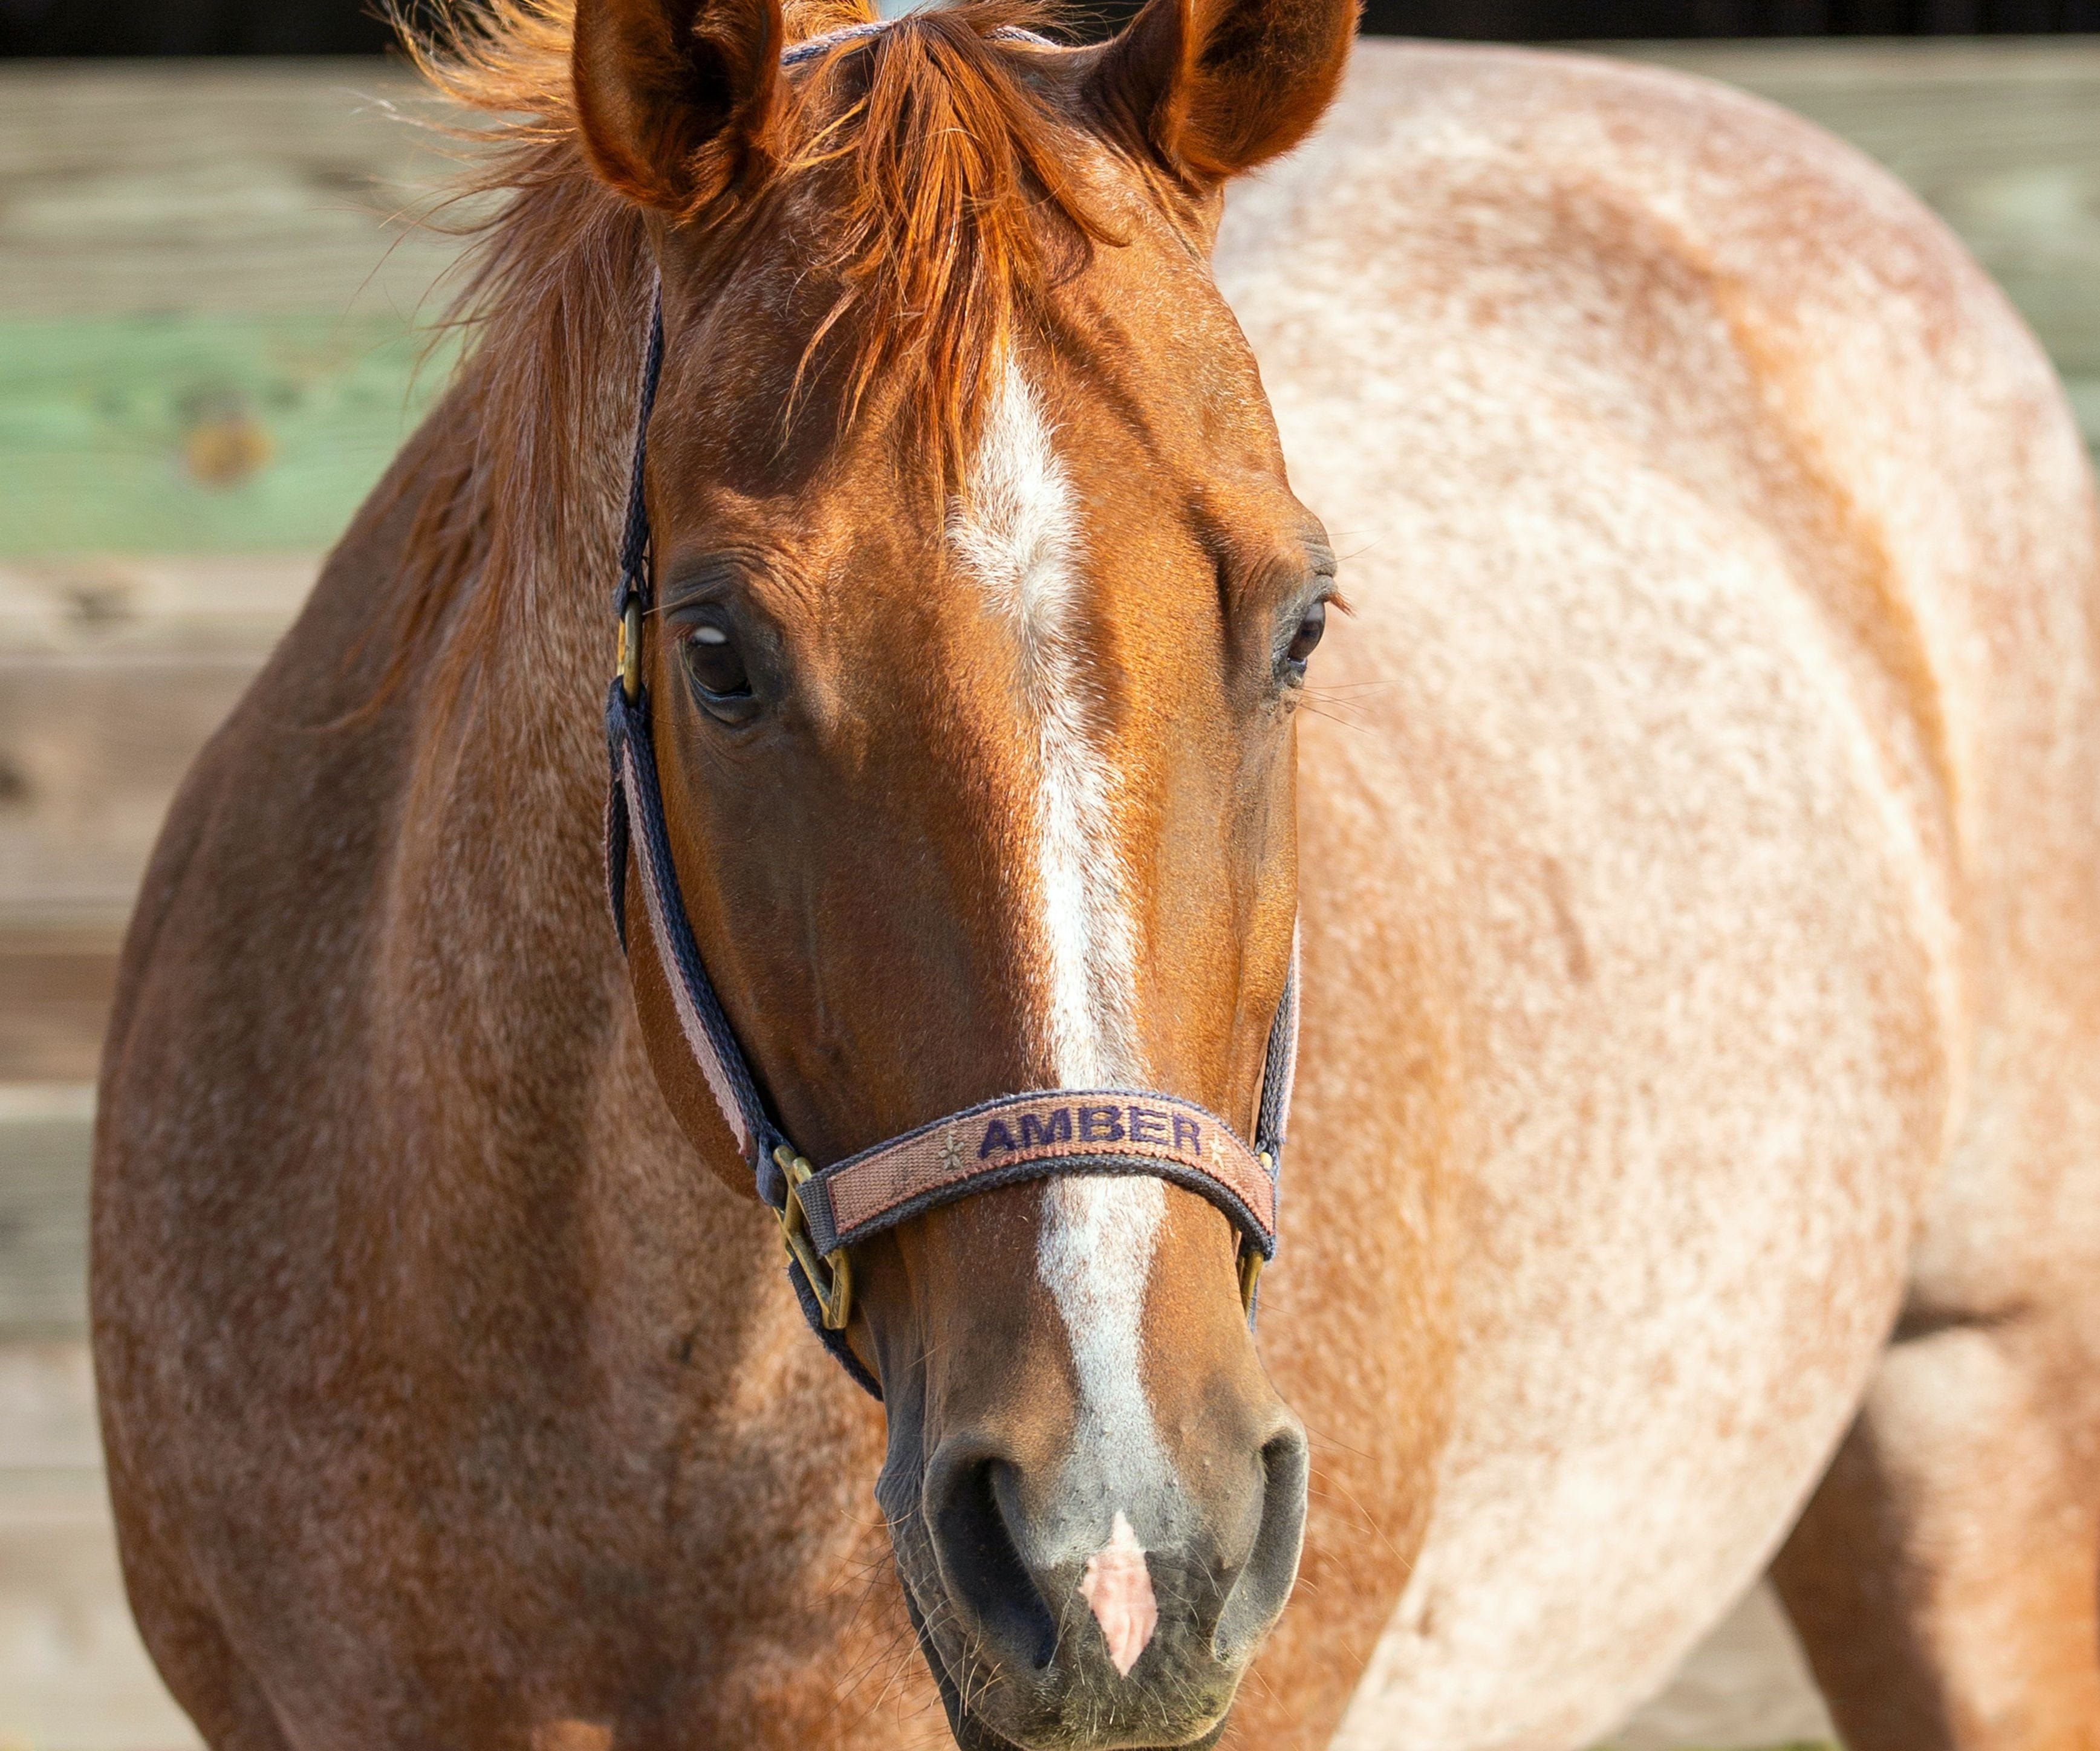 Lucky is a lesson horse at J & S Performance Horses. He is a palomino gelding with a blaze, wearing a red and black halter with his name on it.